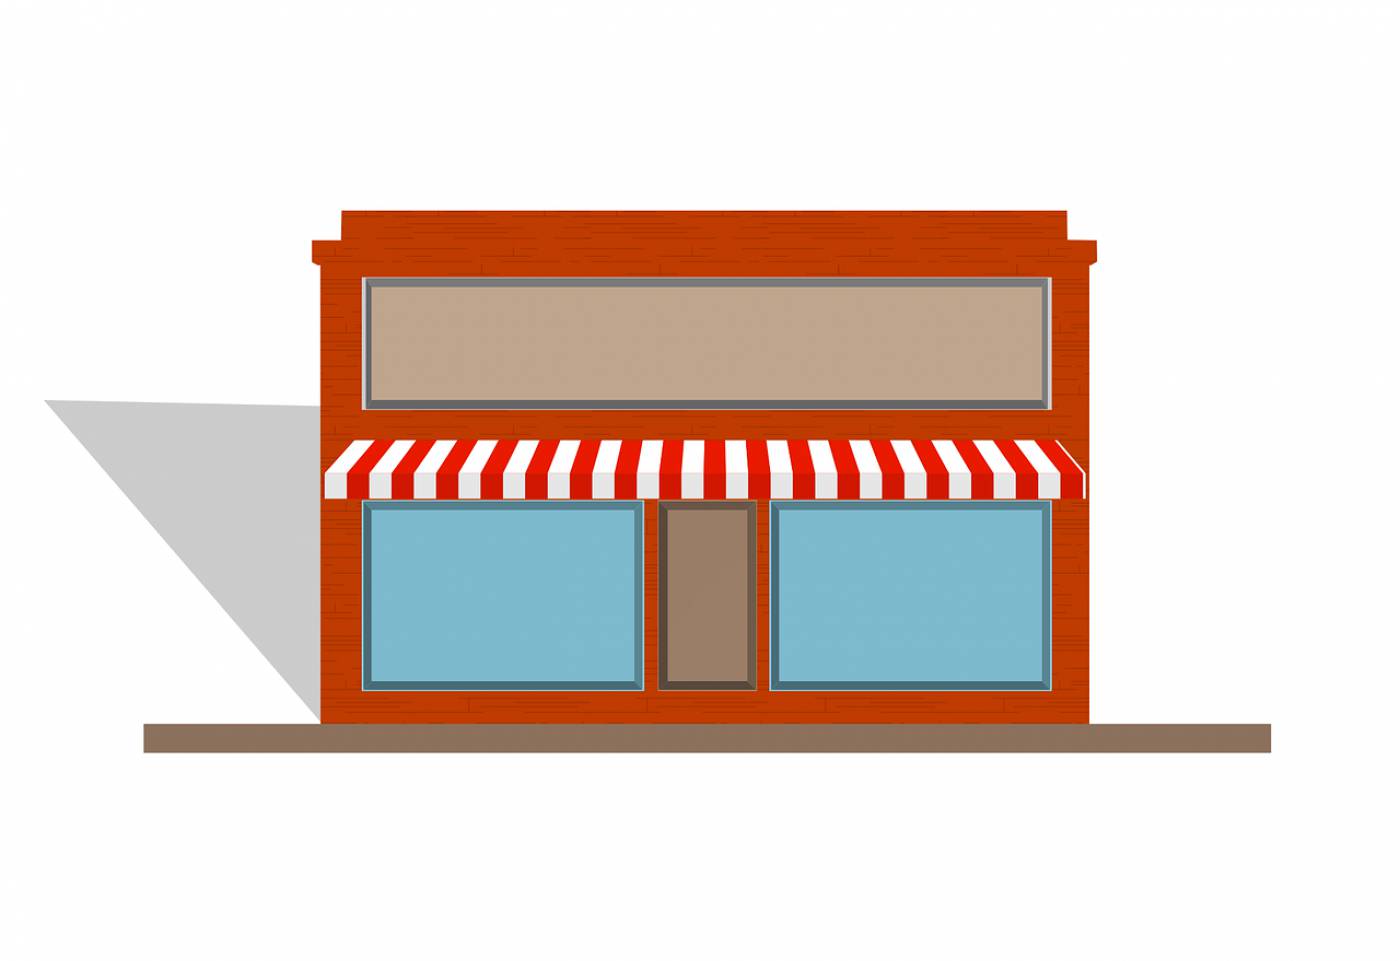 awning store front shop retail  svg vector